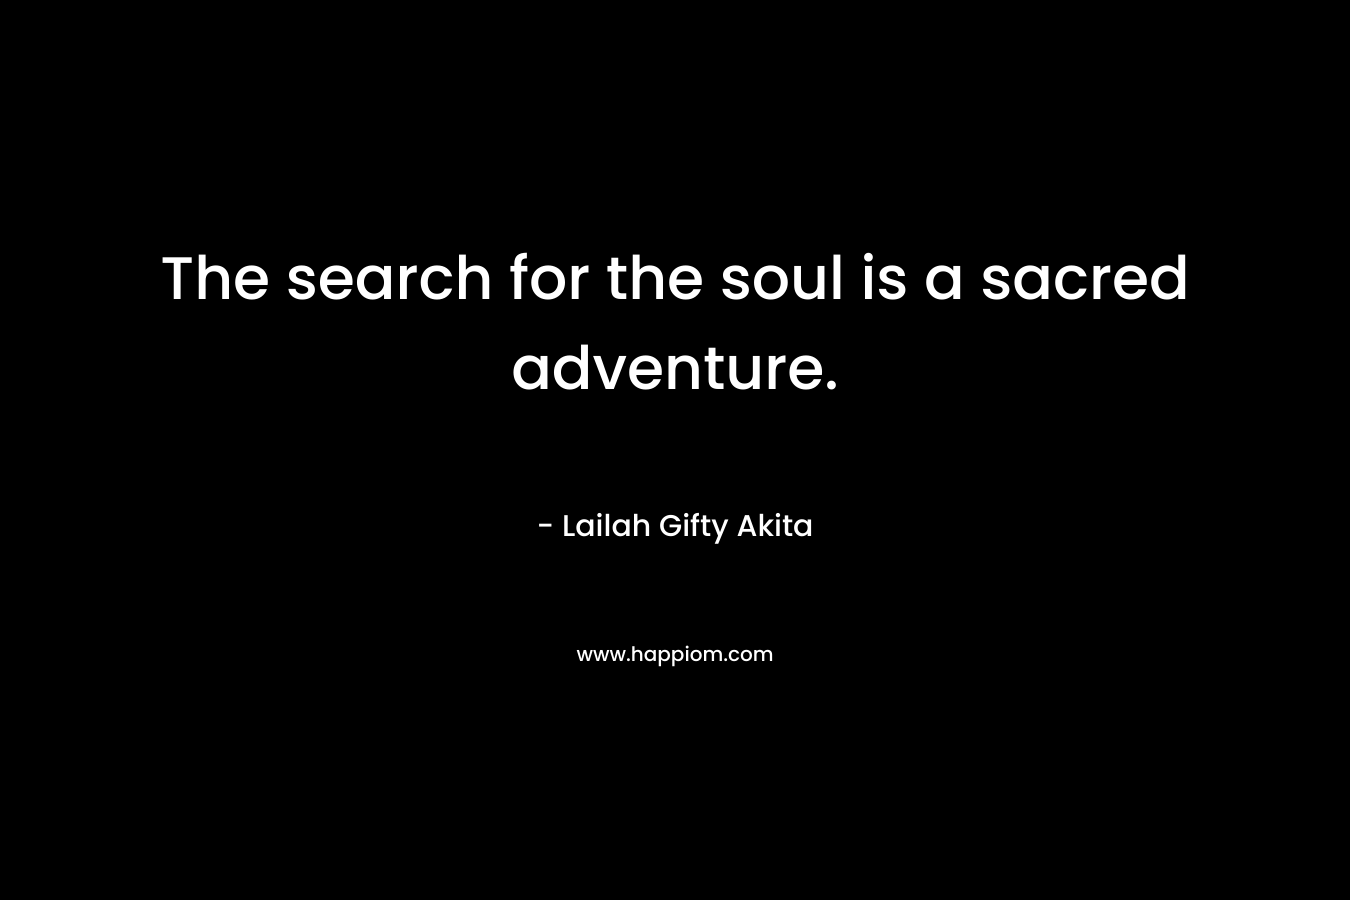 The search for the soul is a sacred adventure.